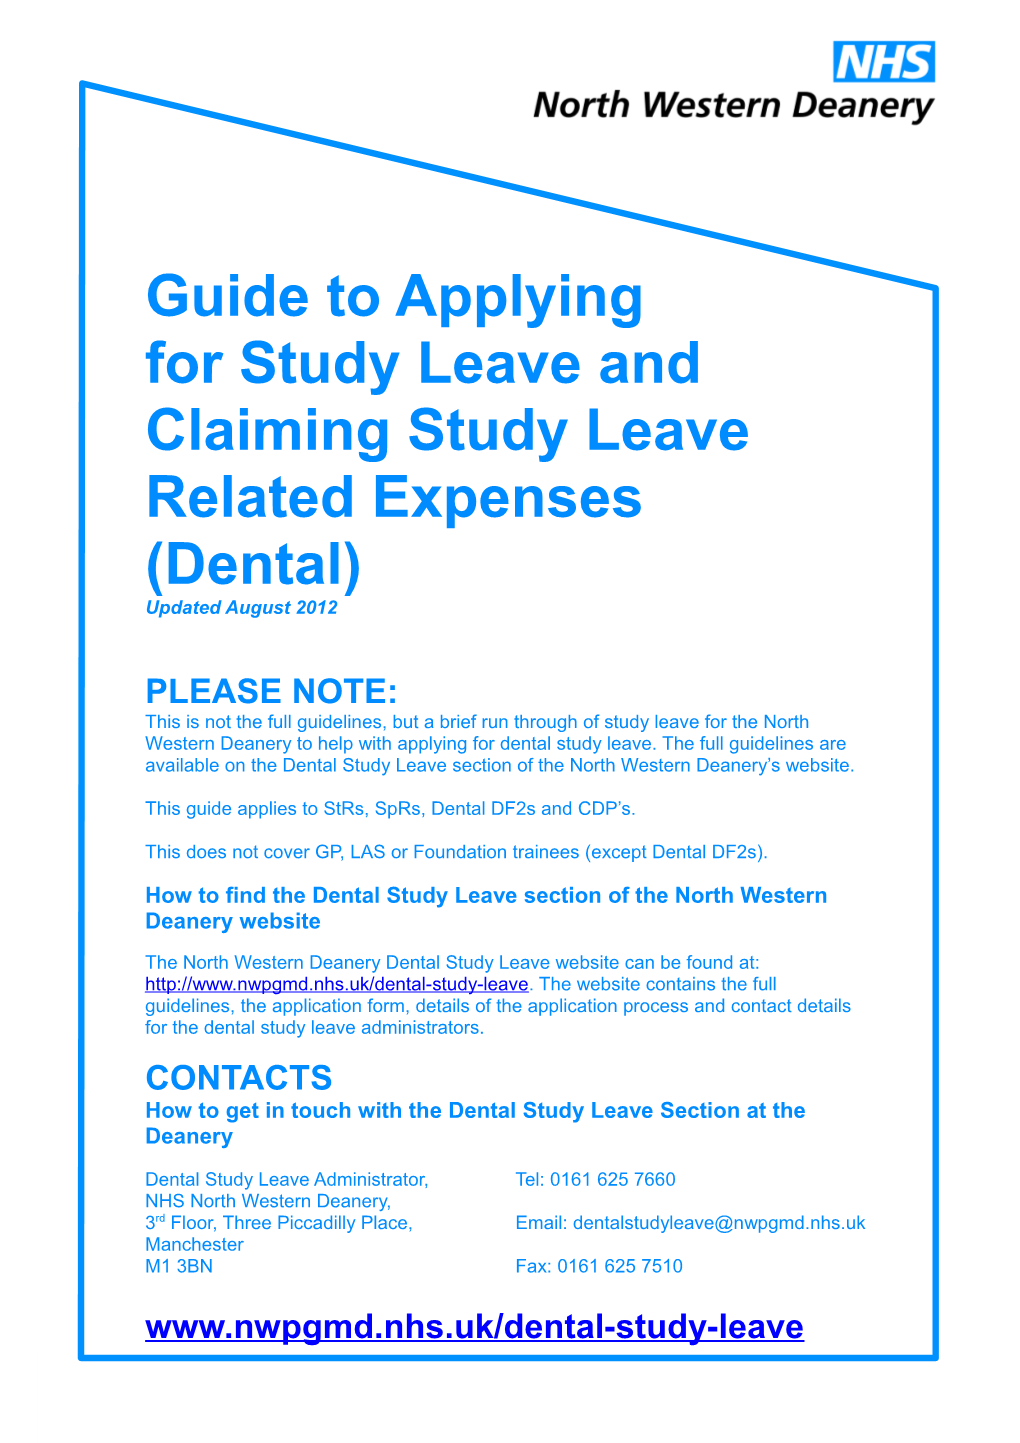 For Study Leave Andclaiming Study Leave Related Expenses (Dental)